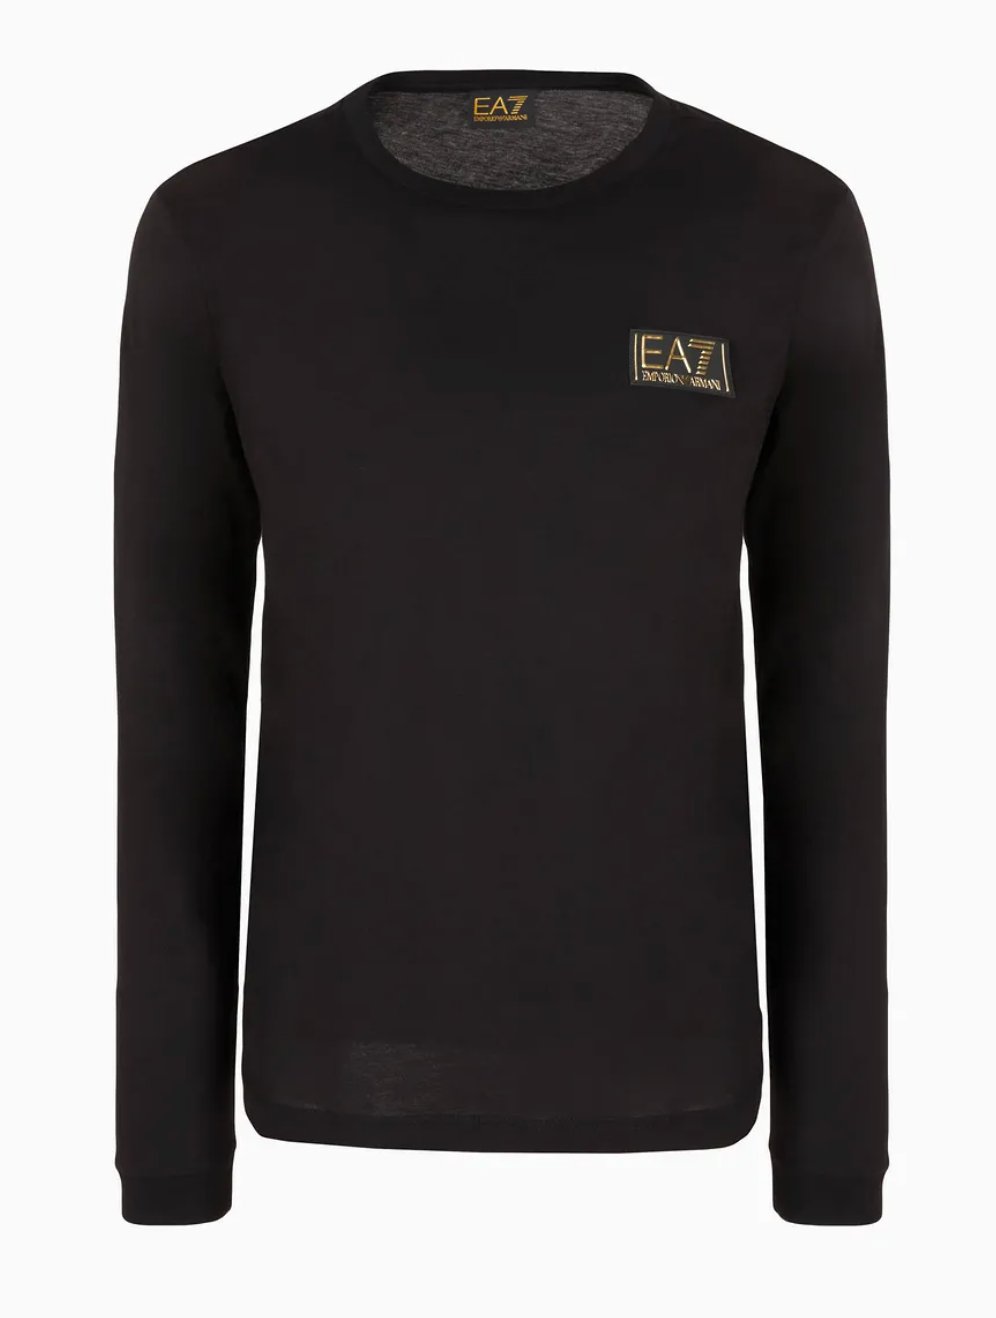 EA7 By Emporio Armani Gold Label Long Sleeved T-Shirt Black